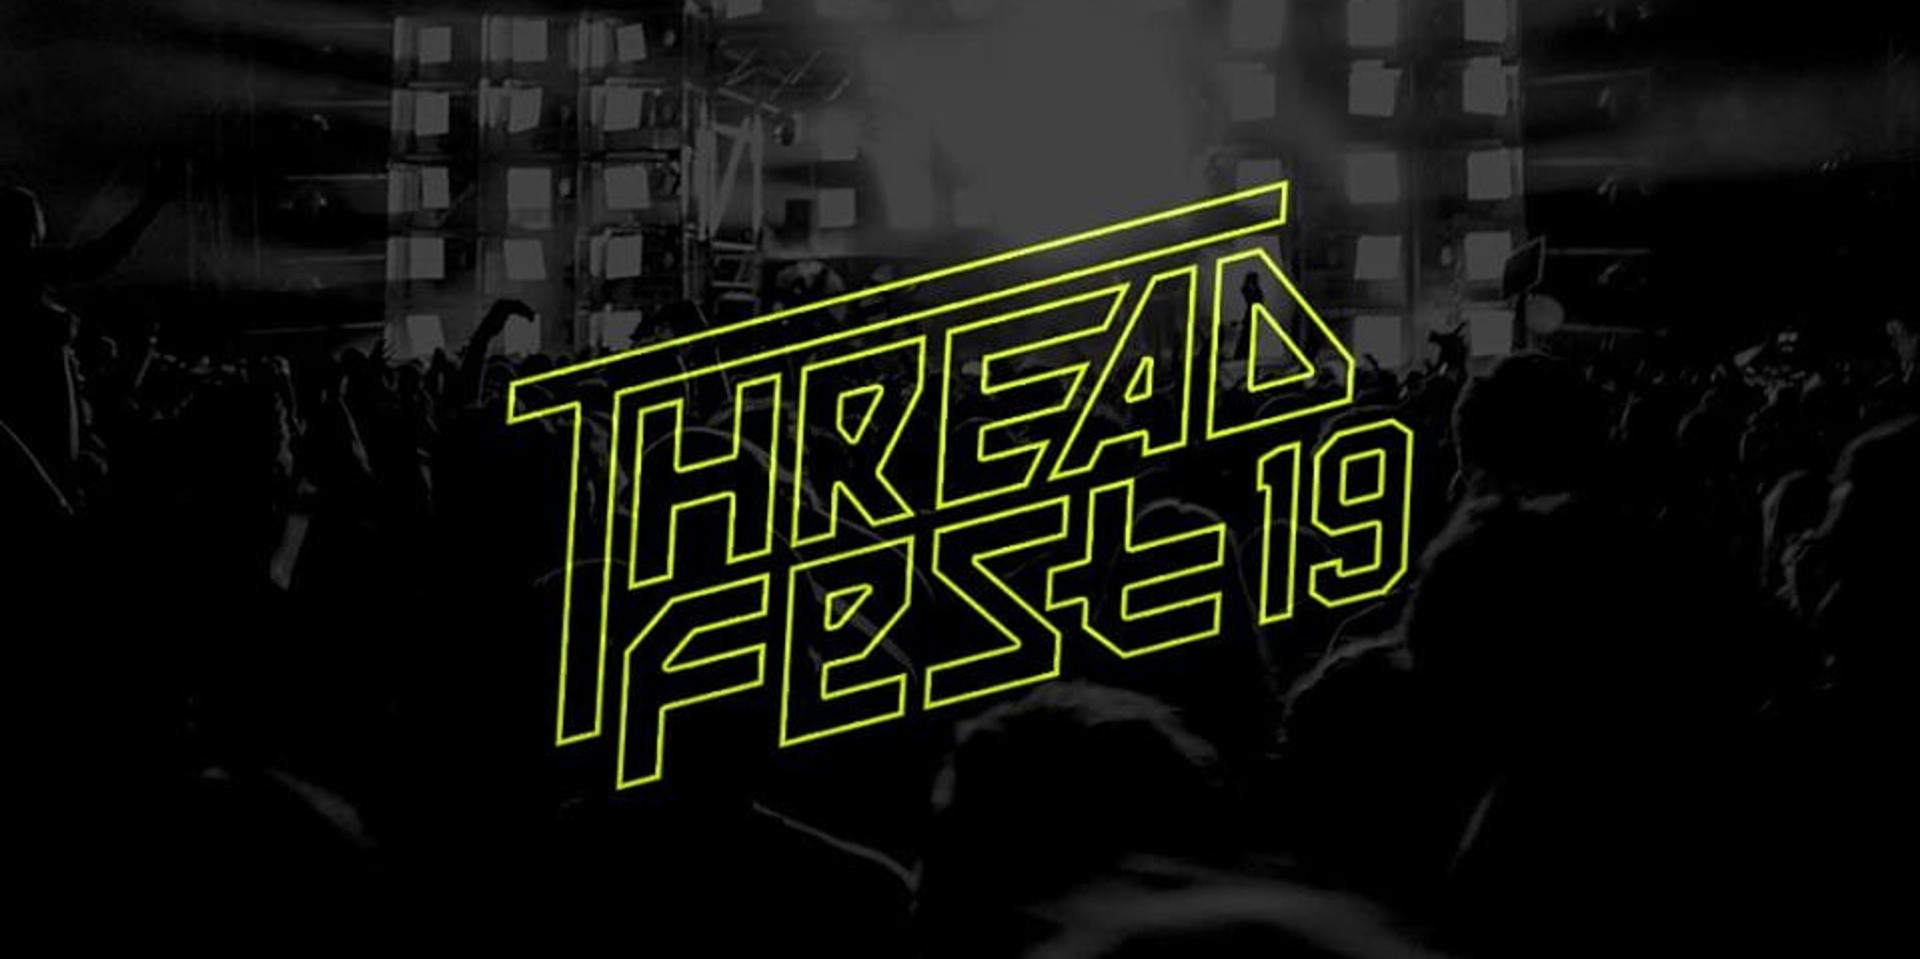 Save the date for Threadfest 2019